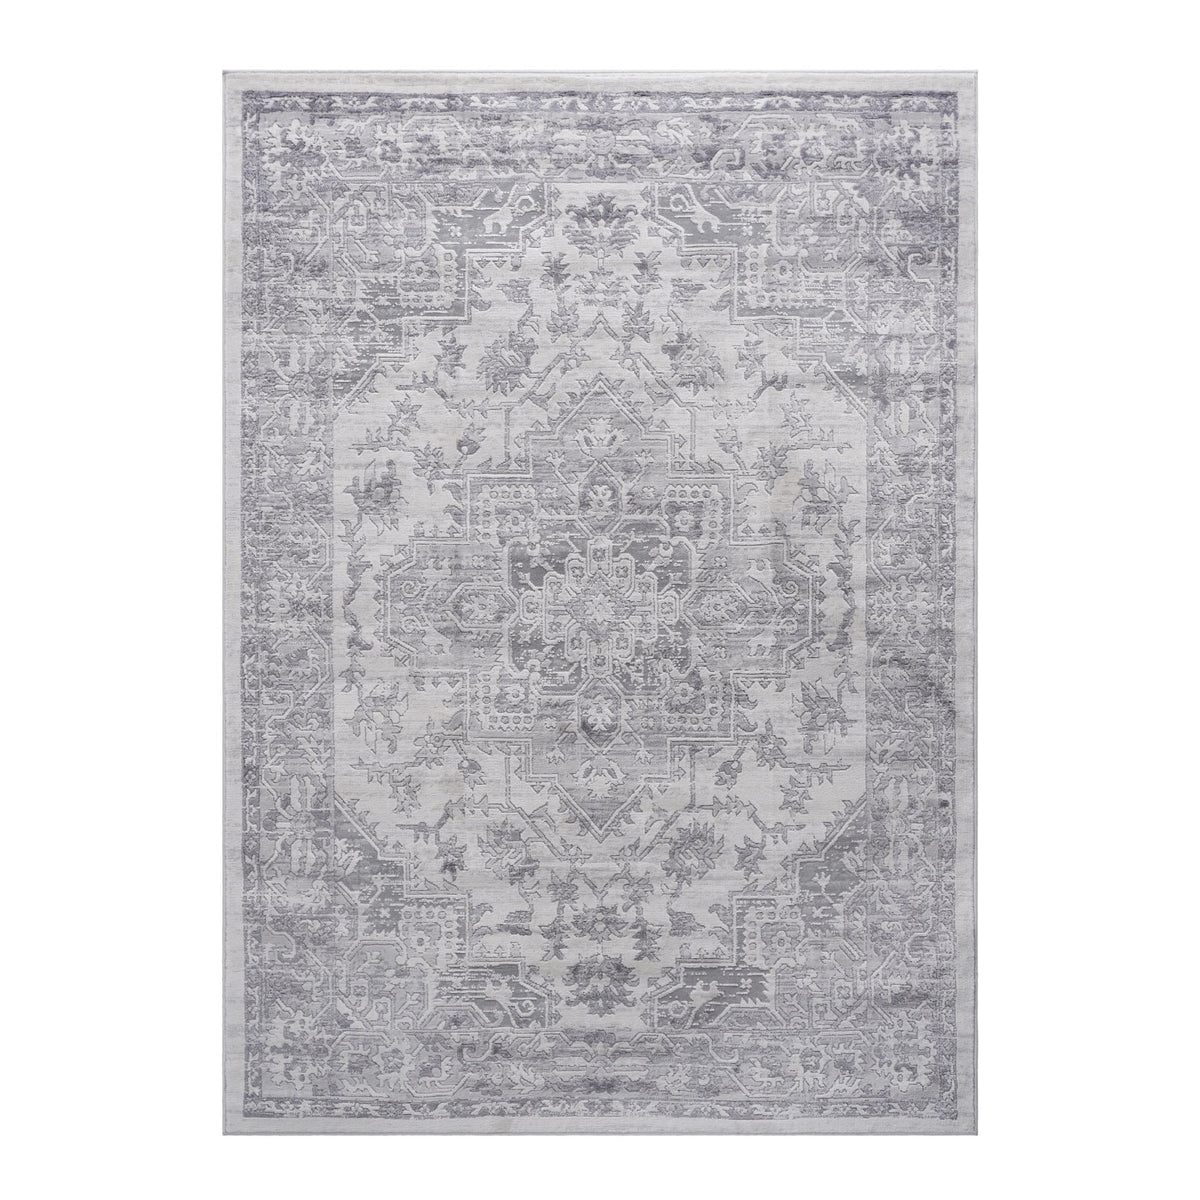 Marfi Silver Rug Size 6'7'' x 9' | Mid in Mod | Houston TX | Best Furniture stores in Houston